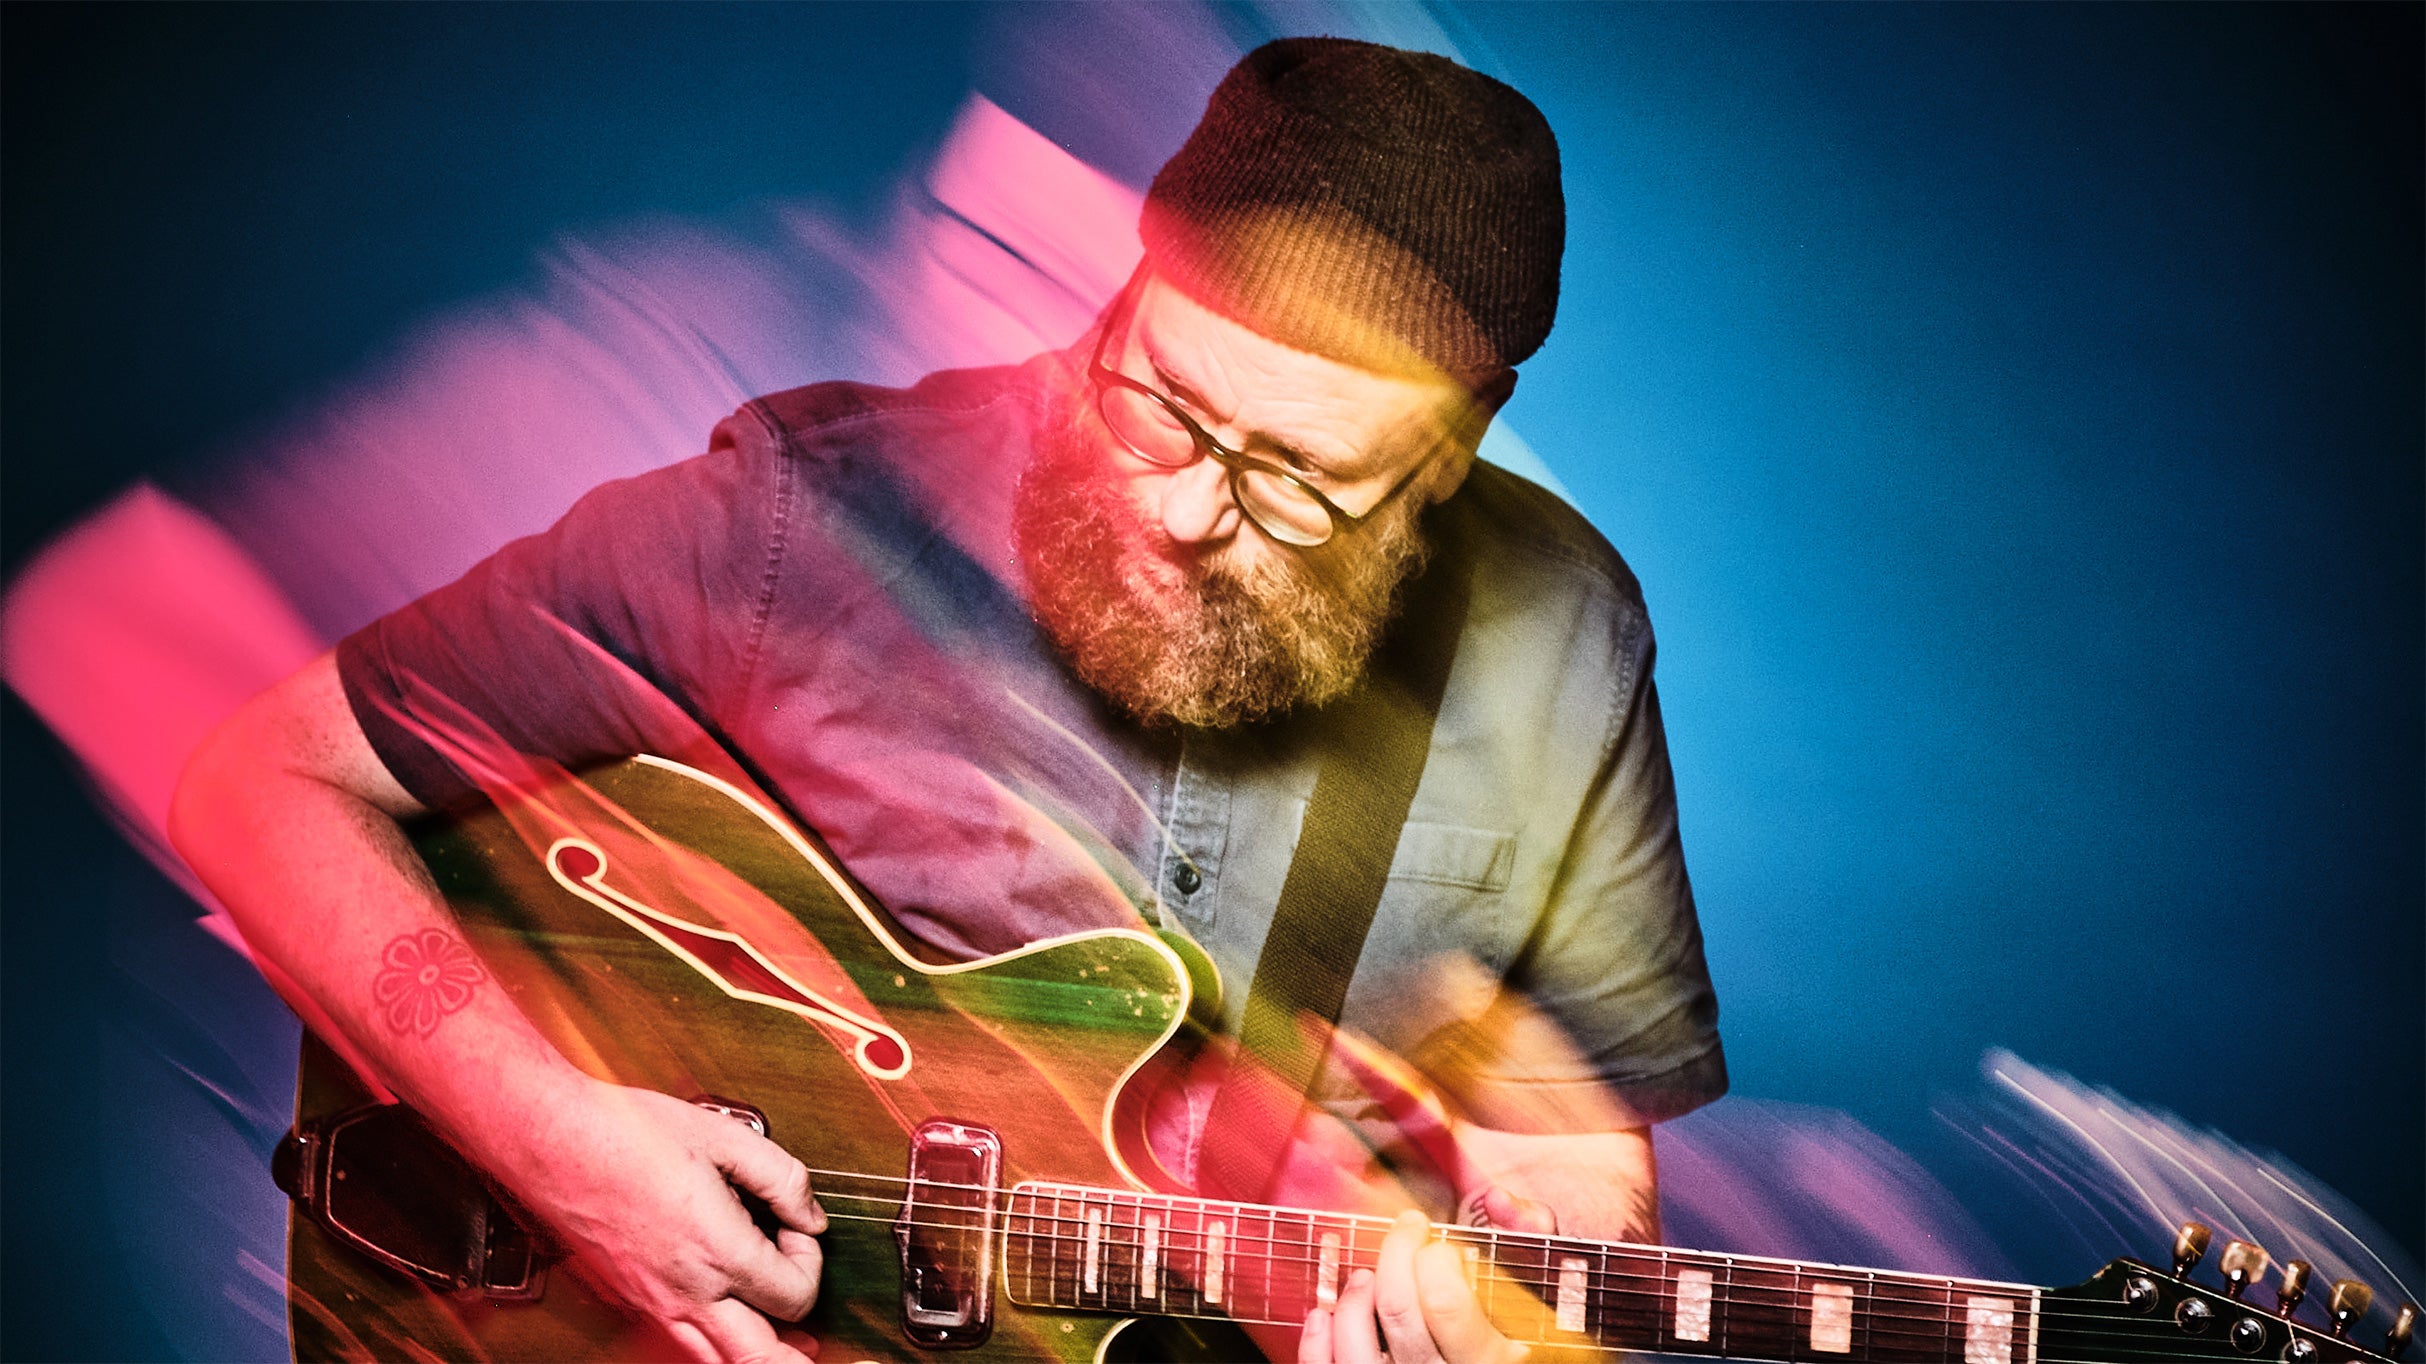 WXPN Welcomes: An Evening With Mike Doughty And Ghost Of Vroom